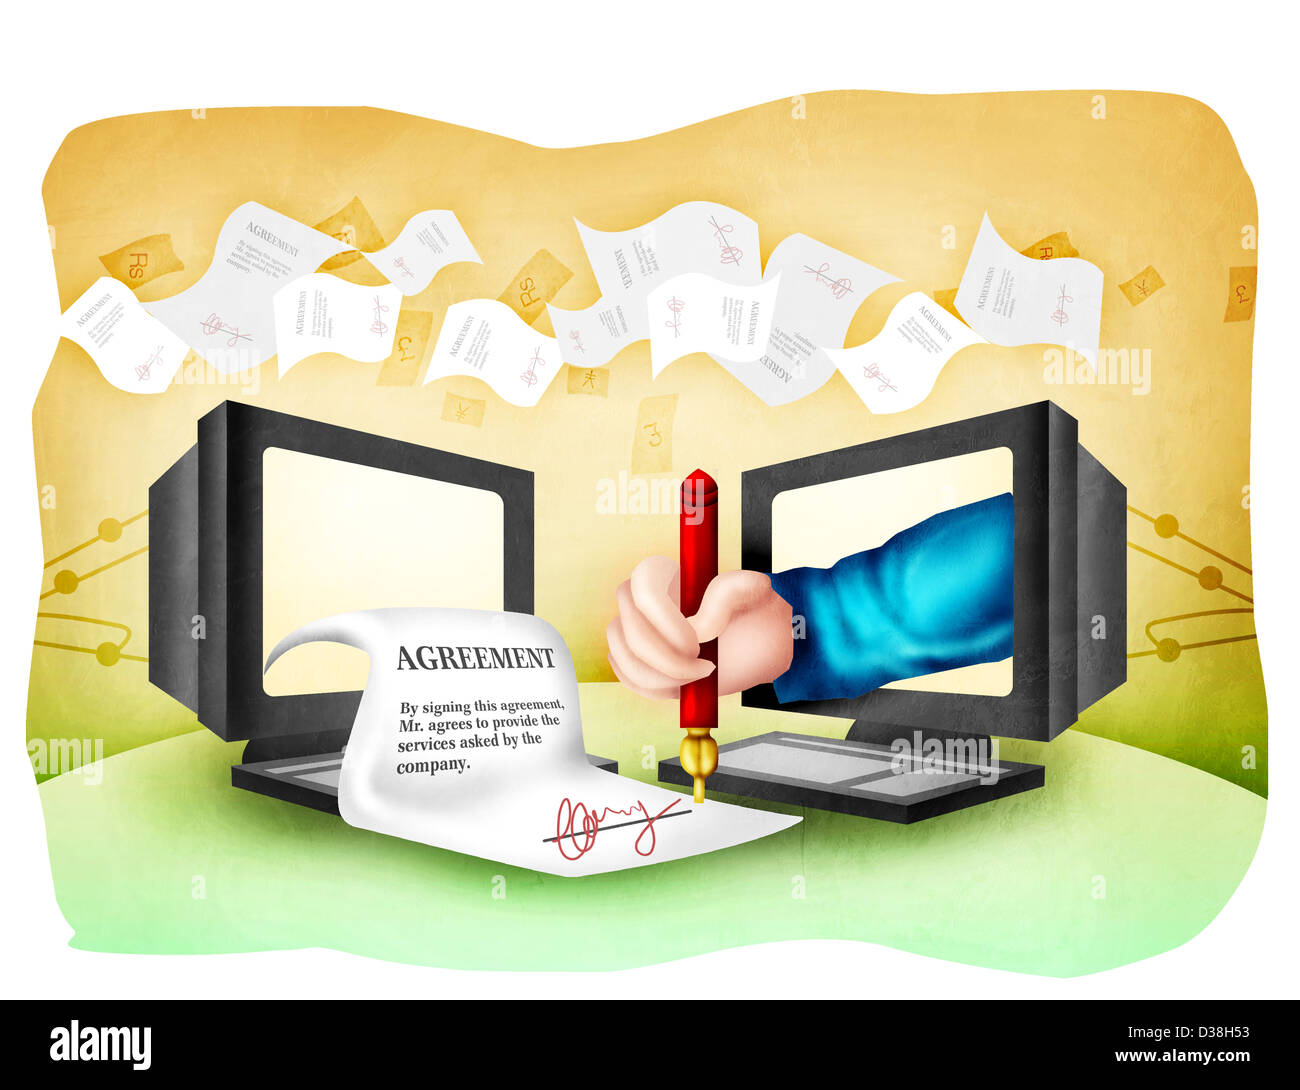 Illustration depicting signing of the online agreement document Stock Photo